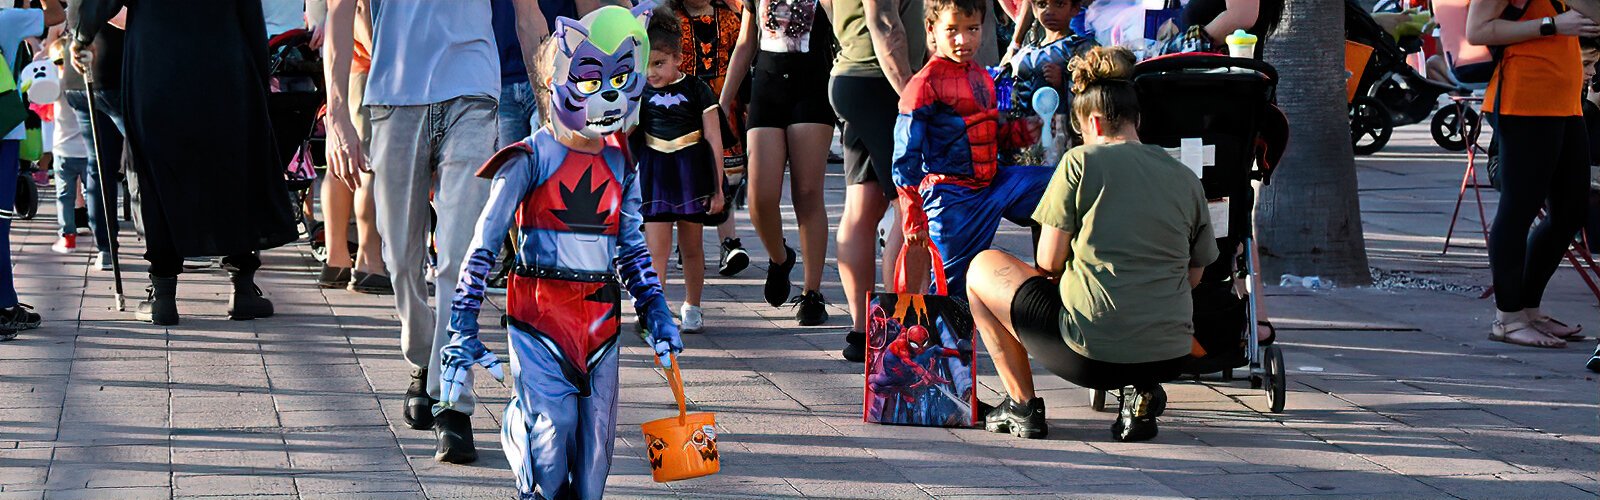  Strolling along the Riverwalk with his candy bucket, a feline catches the attention of a young Spider-Man during the Trick or Treat event.